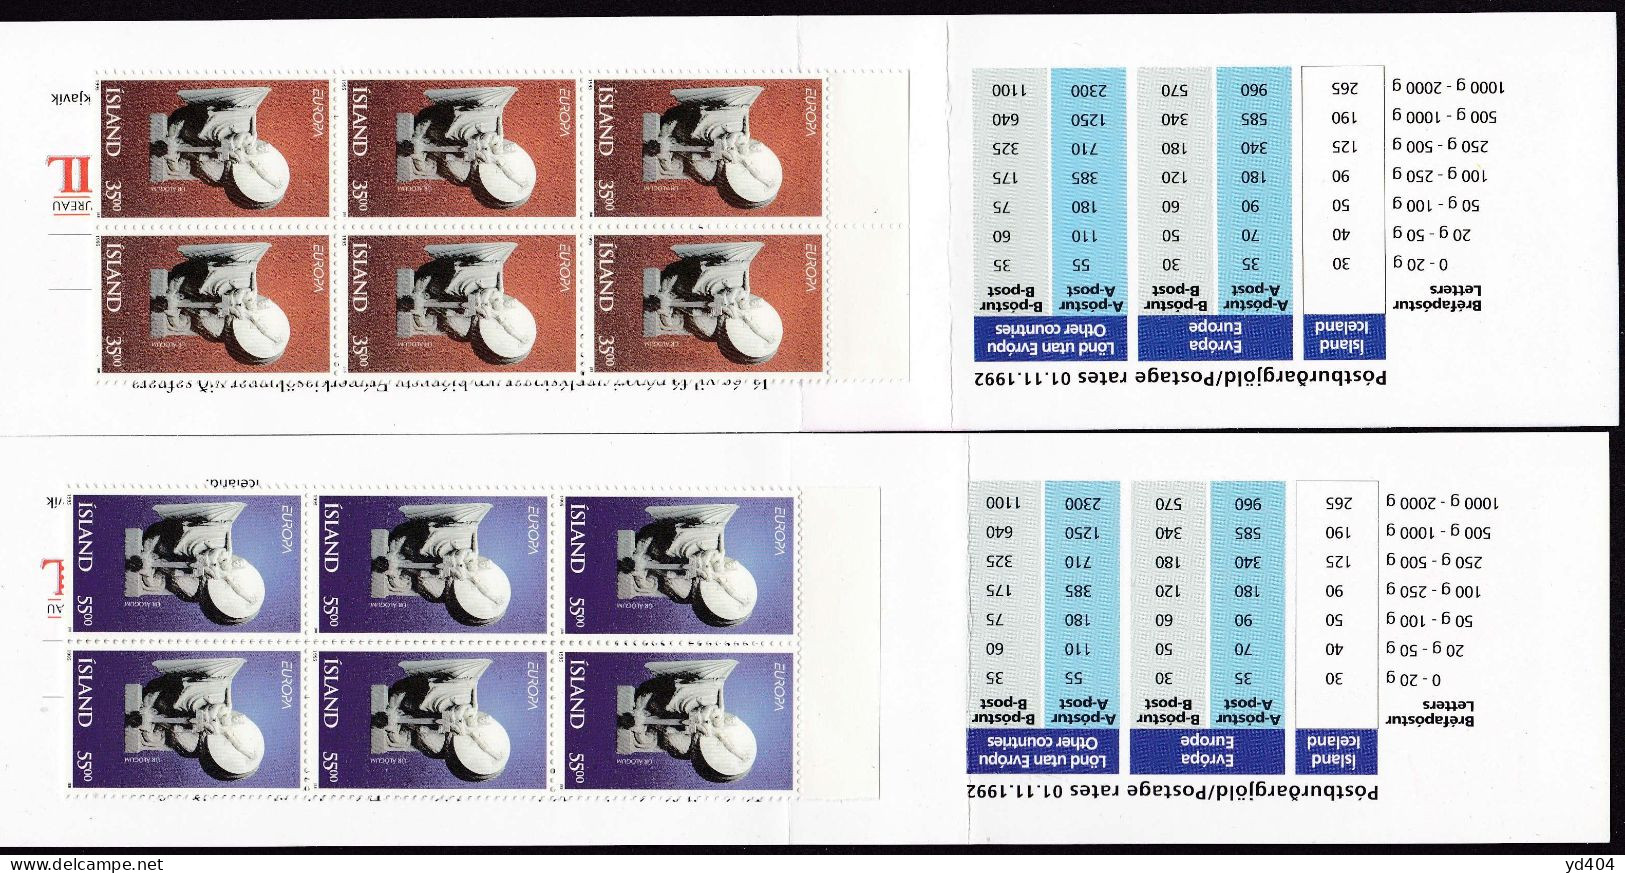 IS668 – ISLANDE - ICELAND - BOOKLETS - 1995 - EUROPA - Y&T # C777/78 MNH 37 € - Booklets